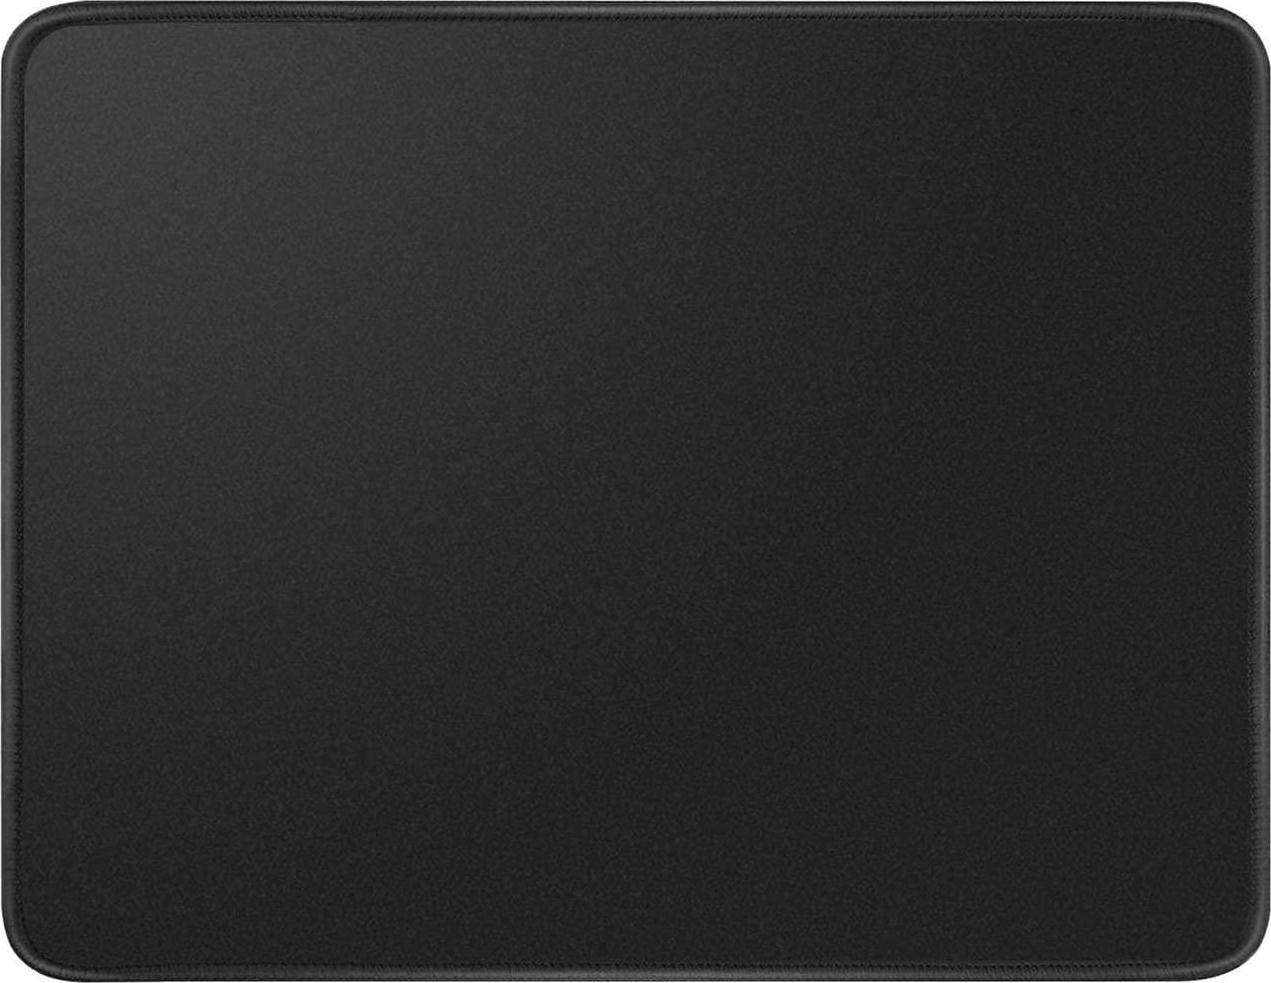 Kriture, Kriture Mouse Pad with Stitched Edge, Non-Slip Rubber Base, Premium-Textured and Waterproof Mousepad for Computers, Laptop, Office and Home, 10.2x8.3inches, 3mm, Black